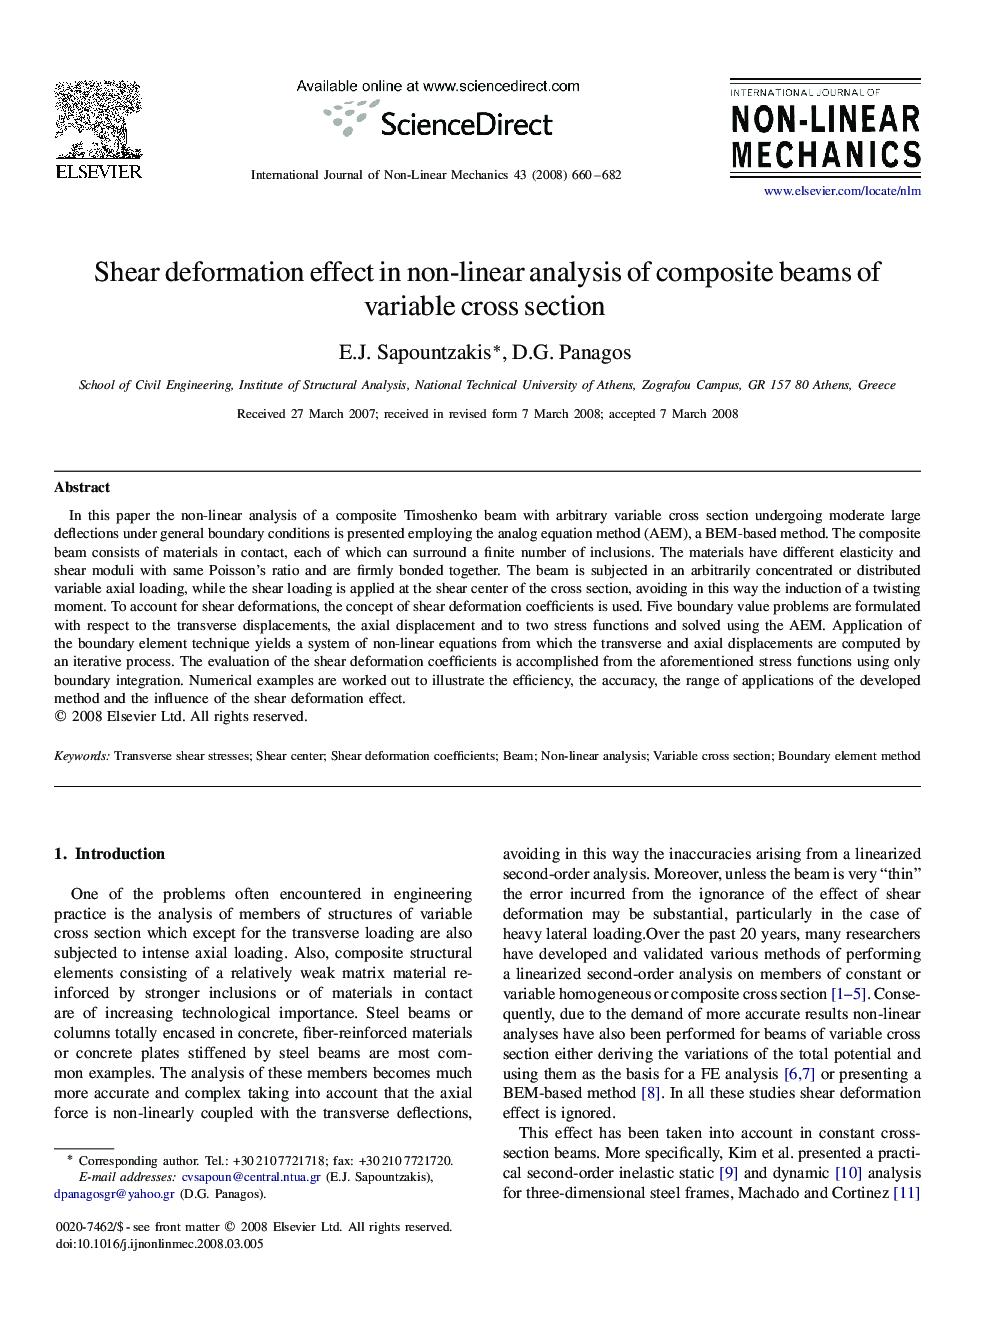 Shear deformation effect in non-linear analysis of composite beams of variable cross section